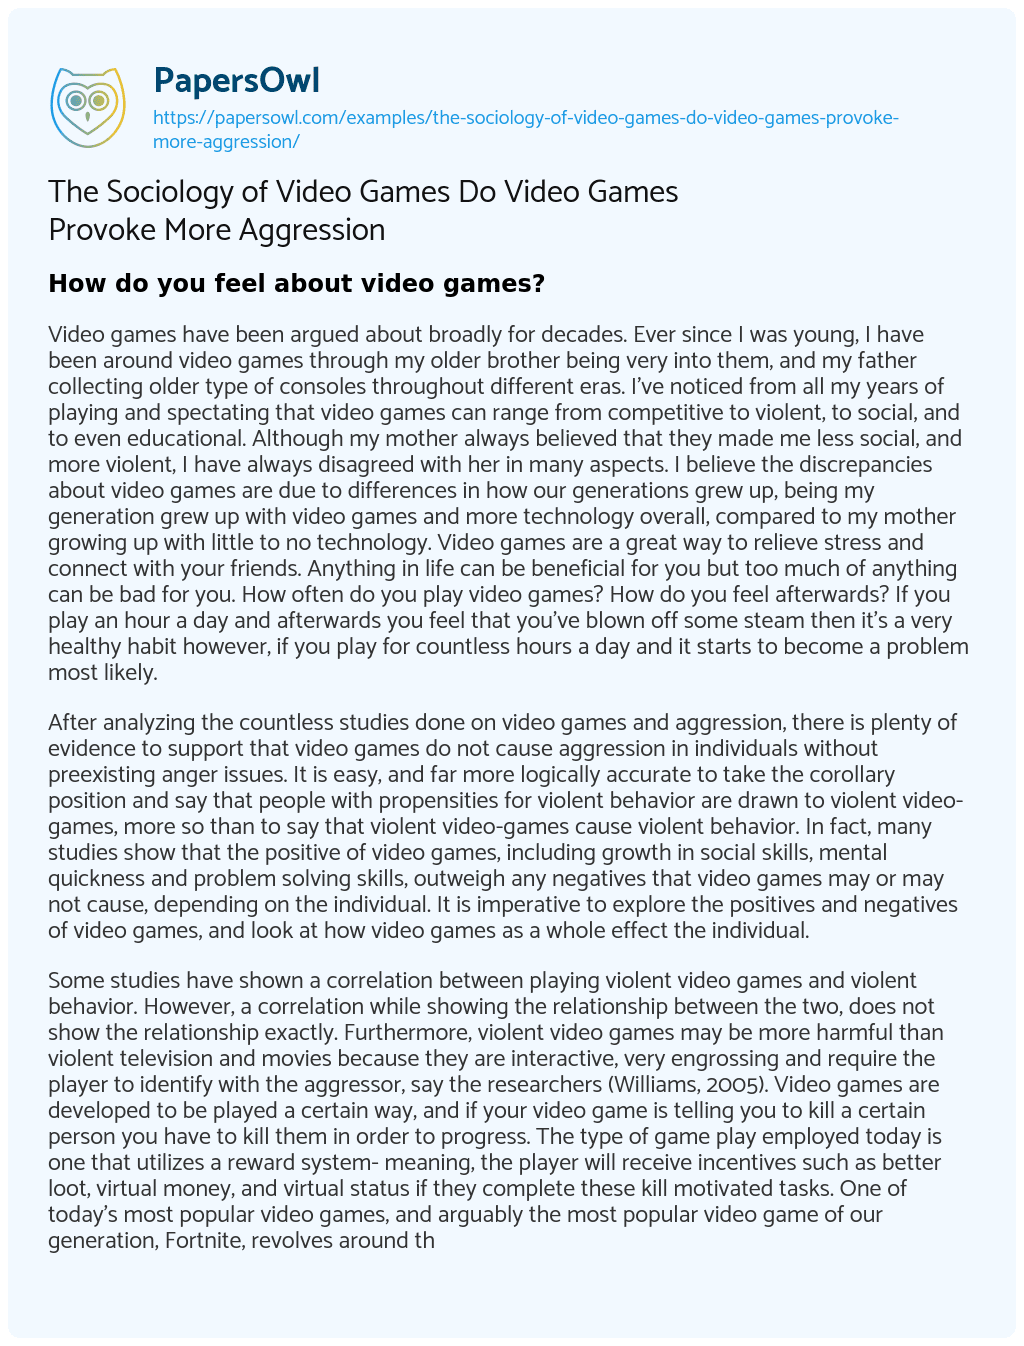 Essay on The Sociology of Video Games do Video Games Provoke more Aggression